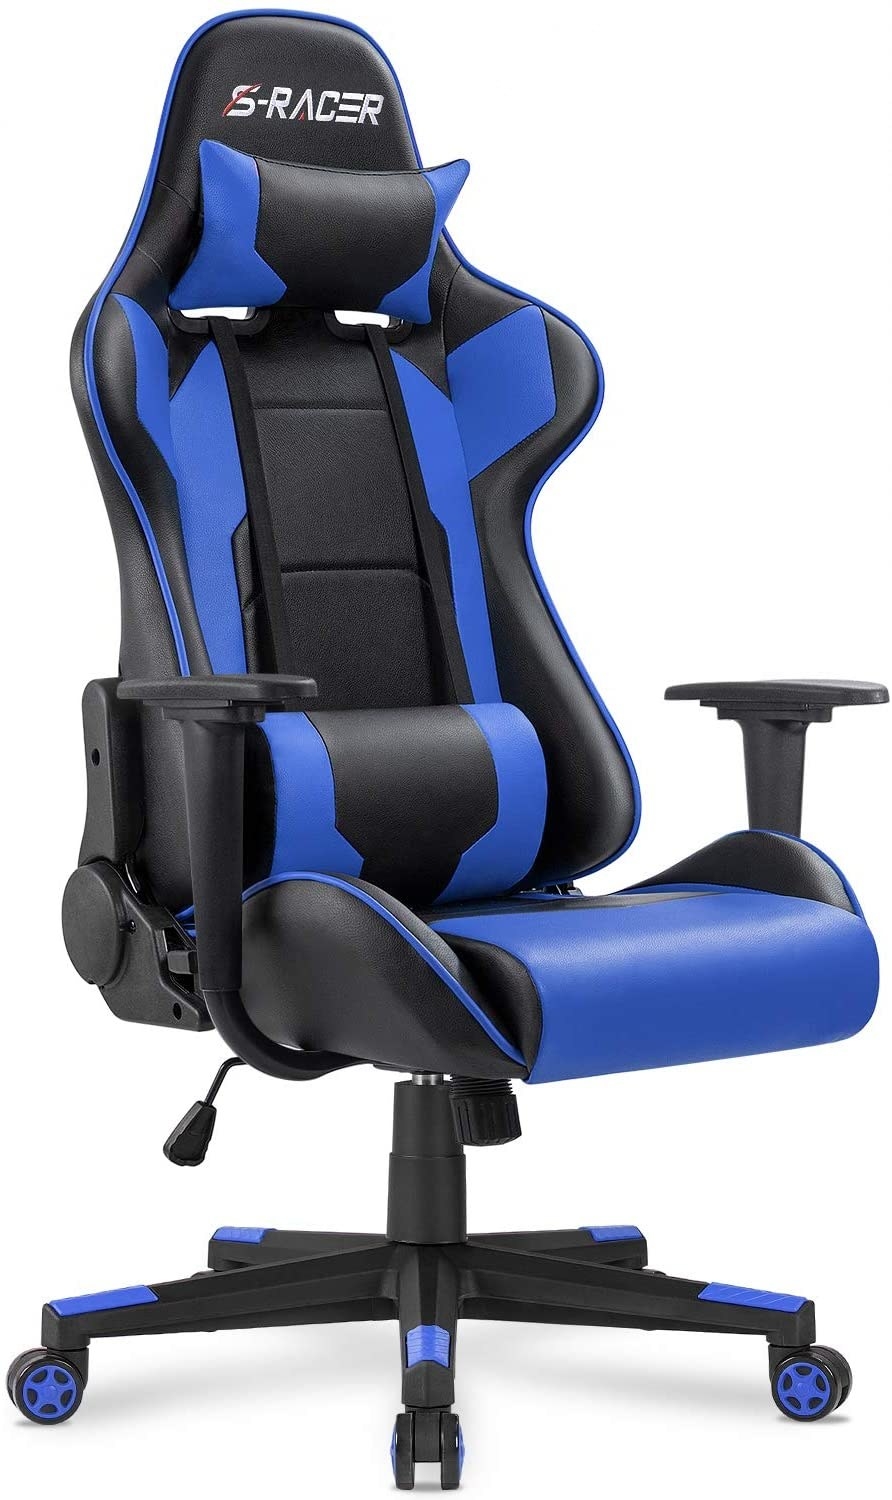 a black and royal blue rolling gaming chair with arm rests, cushions at the neck and lower back for support